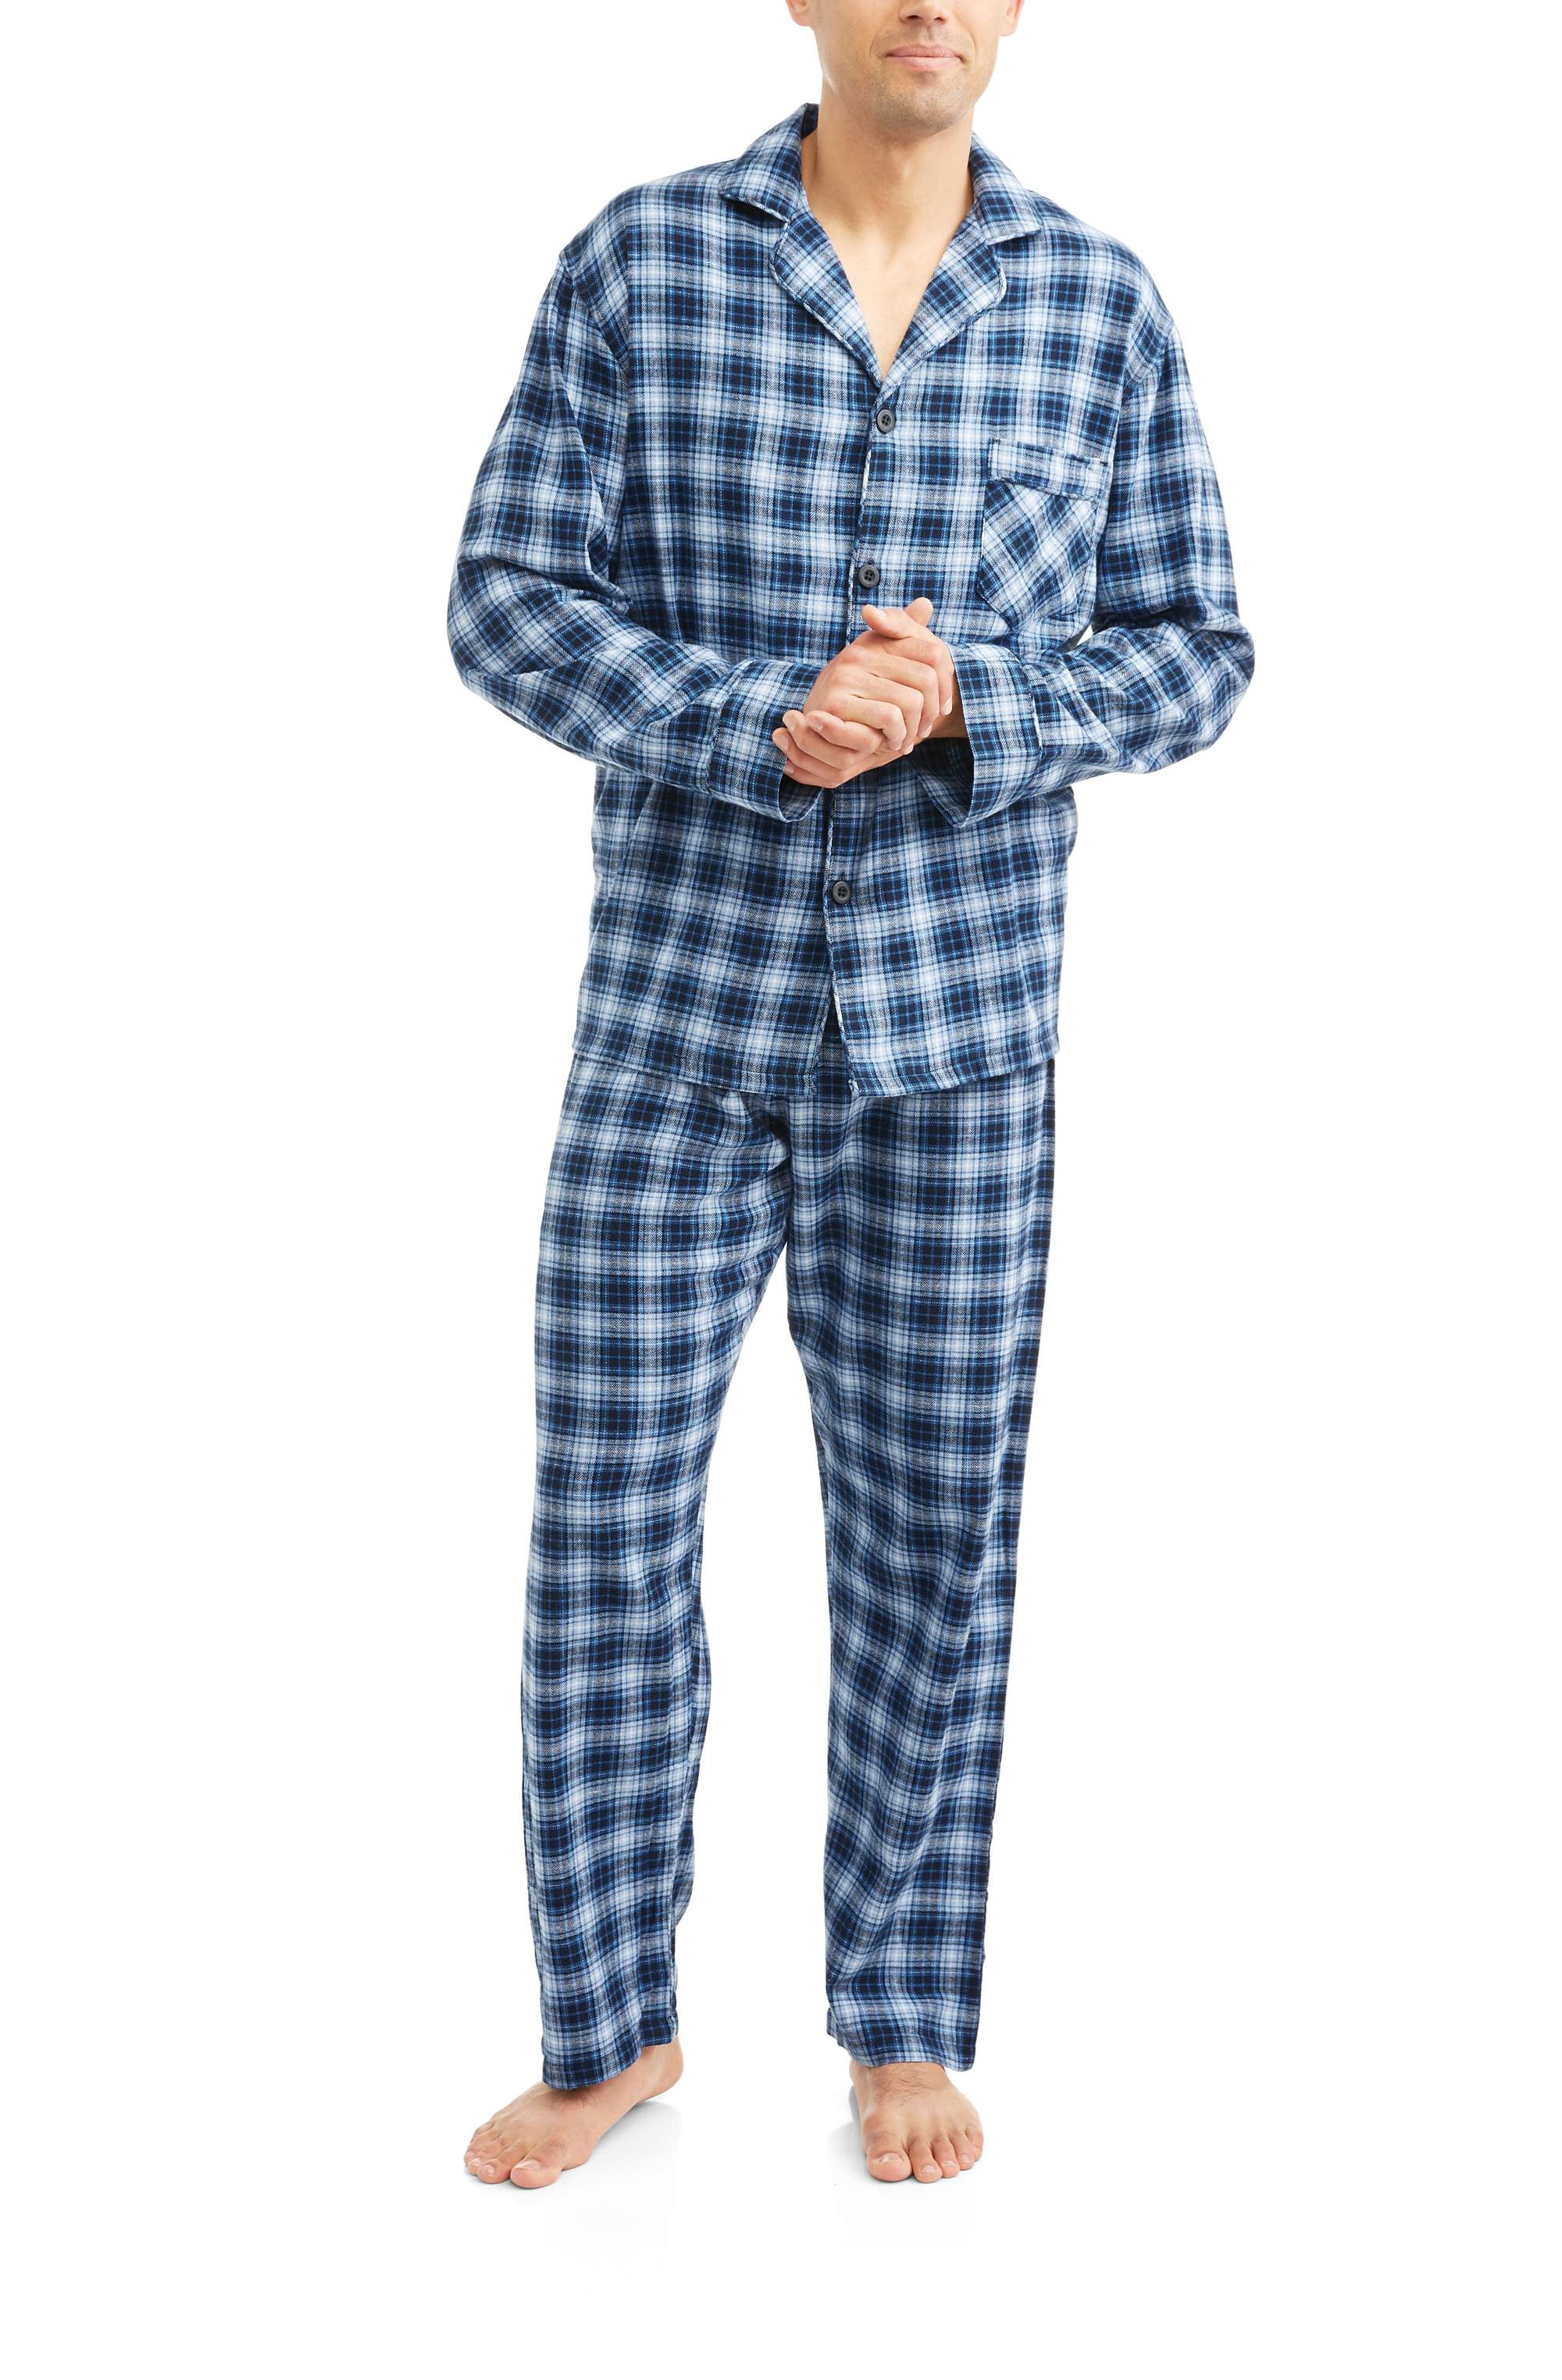 Hanes #5314 NEW Men's Multi-Colored Plaid Long Sleeve and Pant Woven Pajama Set 